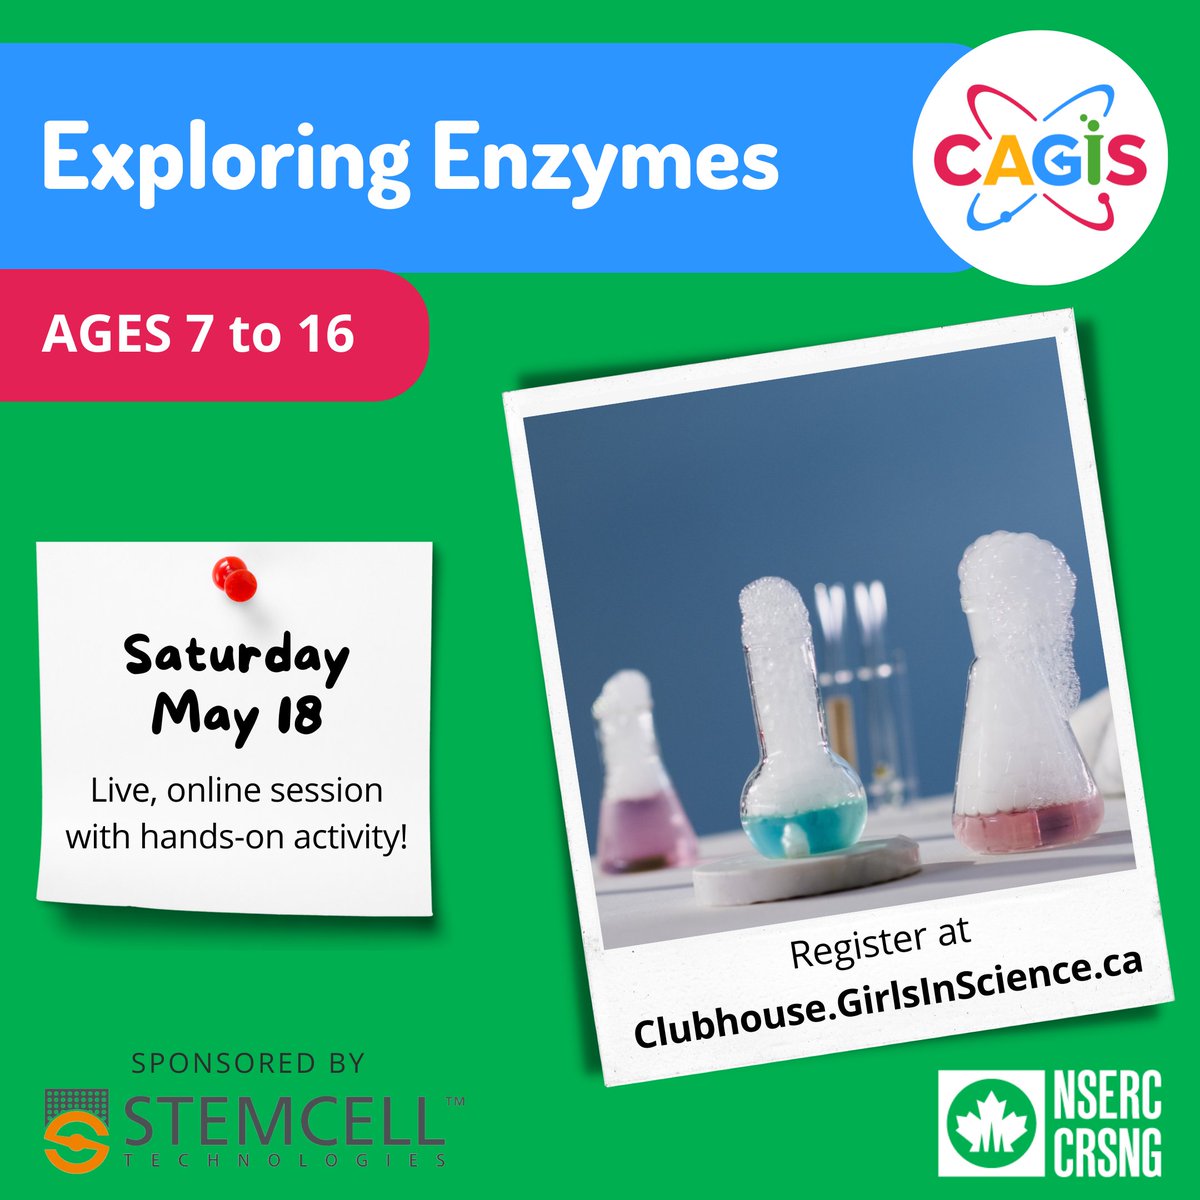 Step into the shoes of a biochemist! In this session, we will experiment with enzymes—amazing molecular helpers that speed up chemical reactions in living things! Thank you to @STEMCELLTech for sponsoring this event! Register at Clubhouse.GirlsInScience.ca/CAGIS-Virtual 🧪 #GirlsInScience